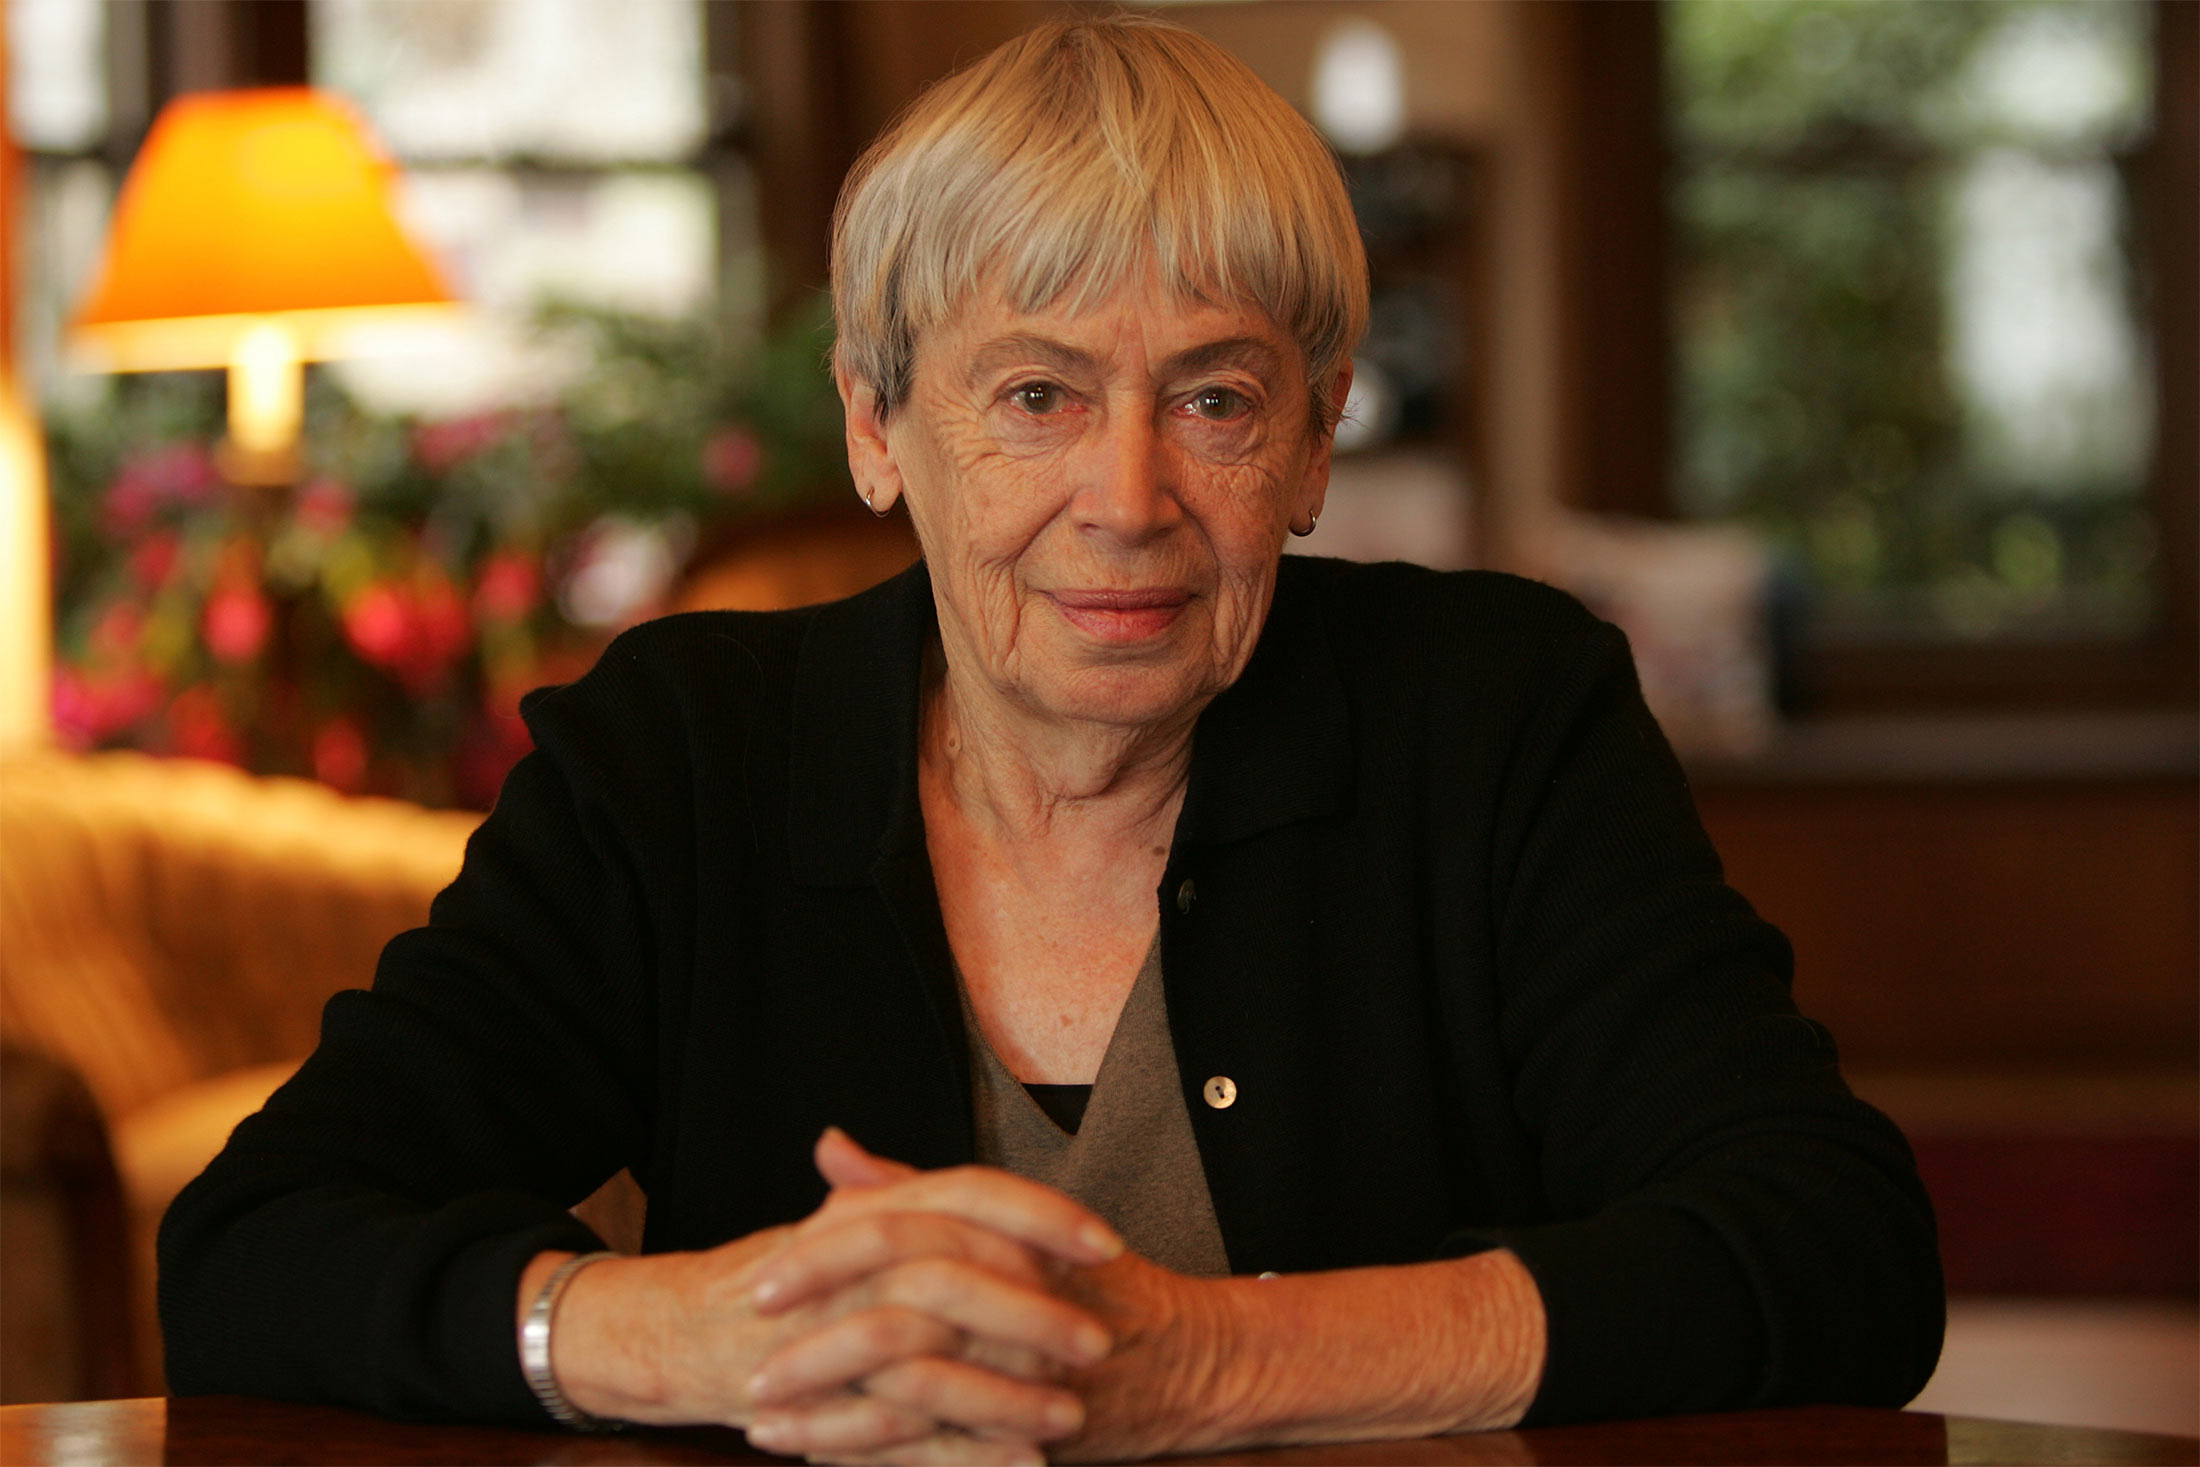 Ursula K. Le Guin, Best-Selling Science Fiction Author, Dies - Bloomberg